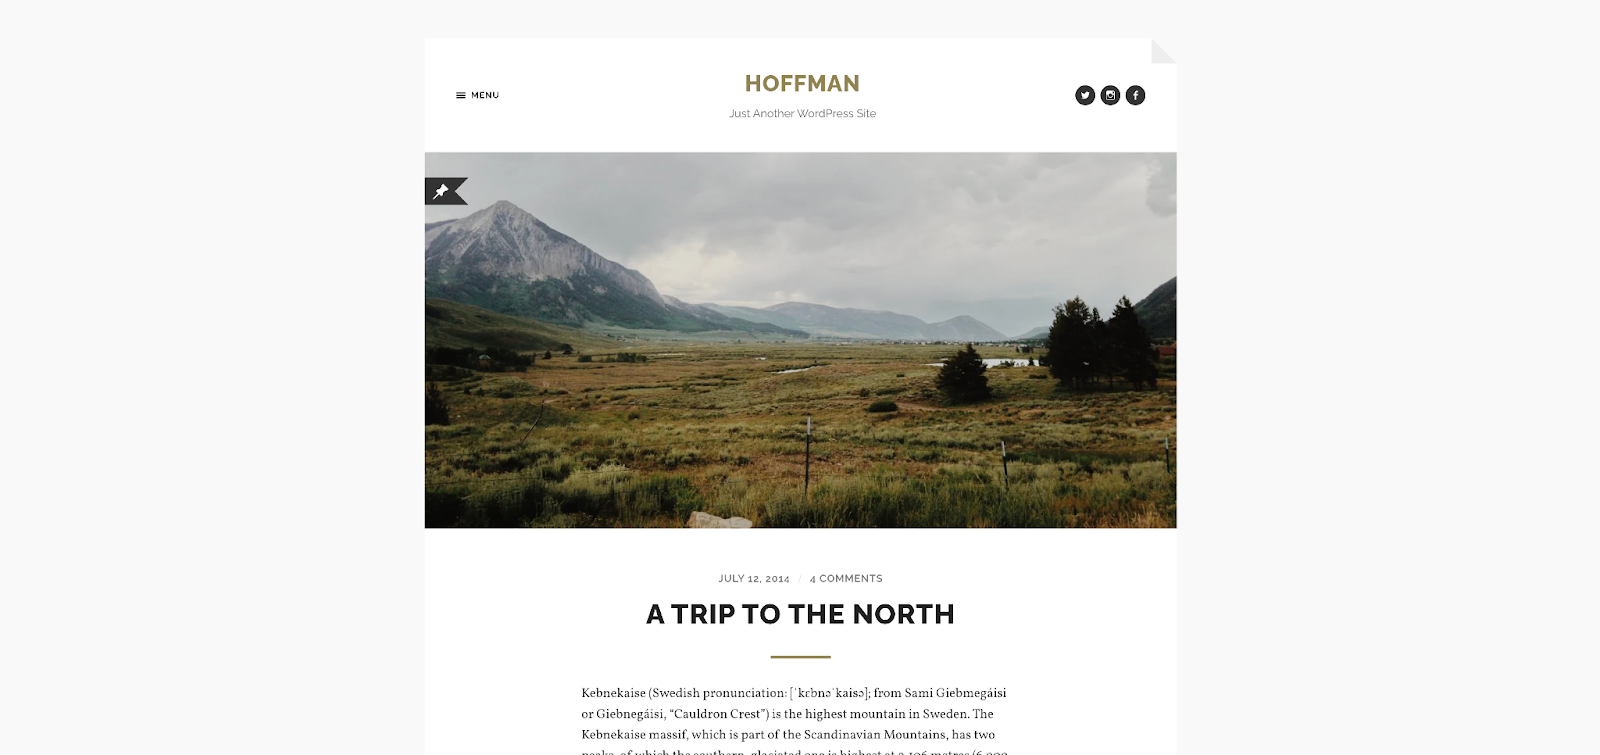 A minimal blog layout with a cute dog-eared page layout, Hoffman makes a great choice for your next blog